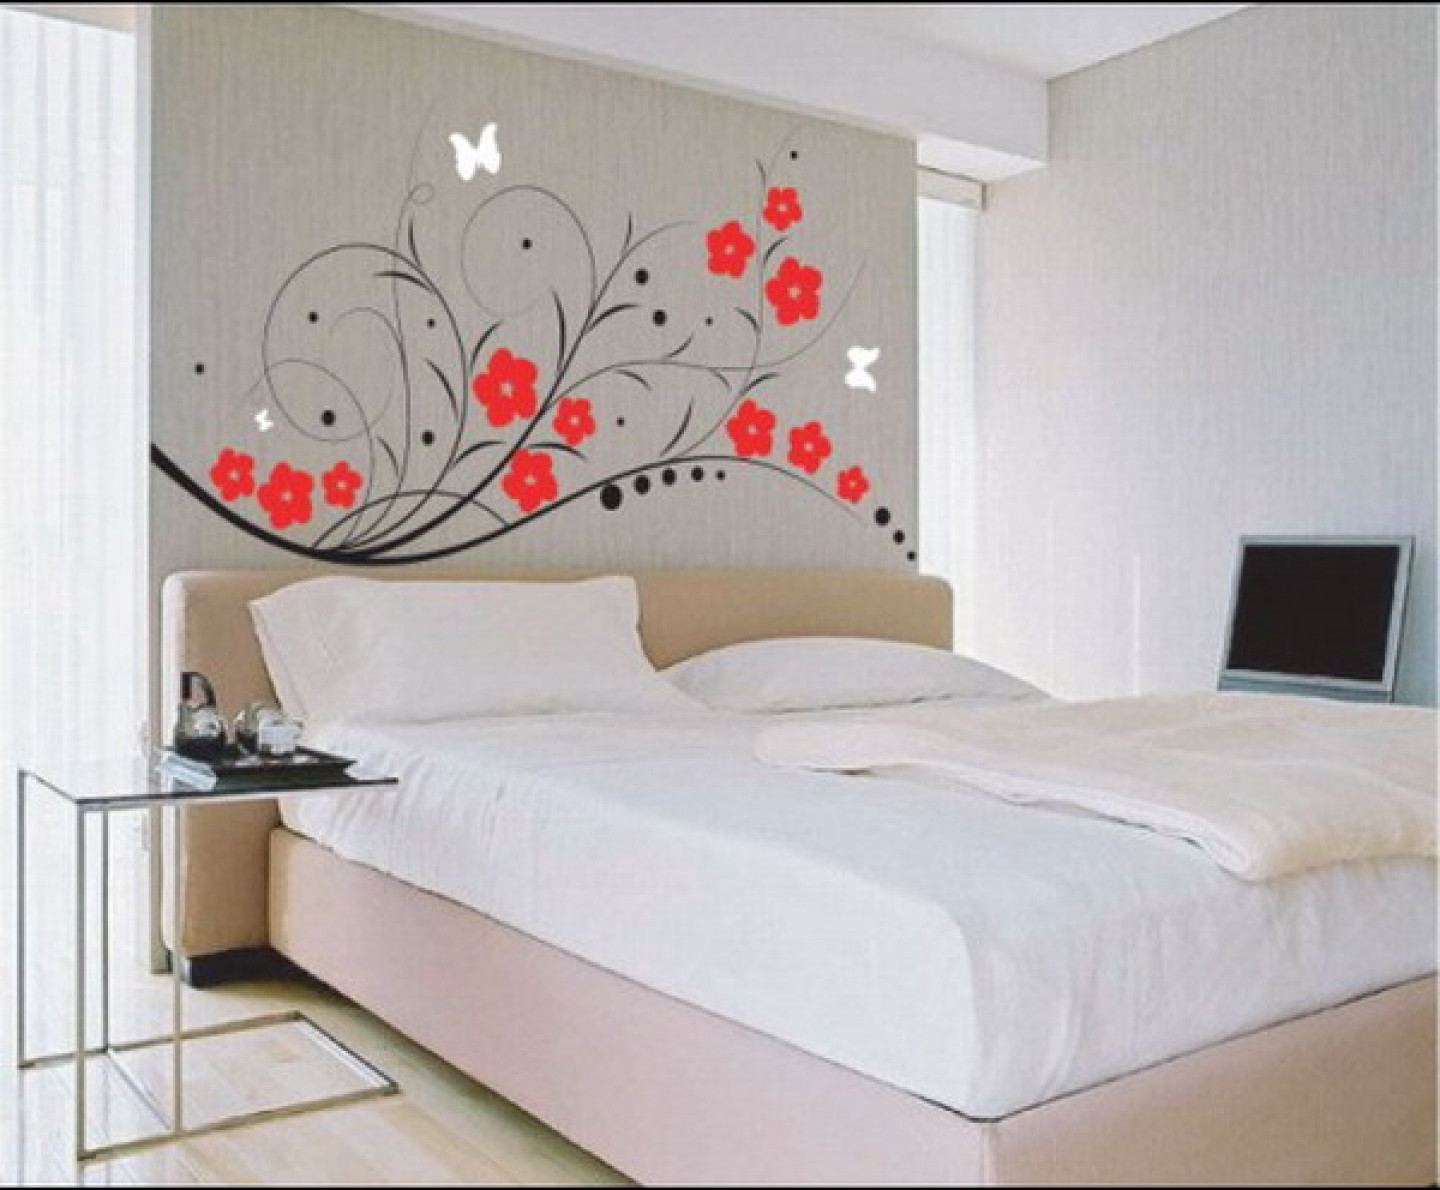 Bedroom Wall Decor Stickers
 Things to Know about Bedroom Wall Decals